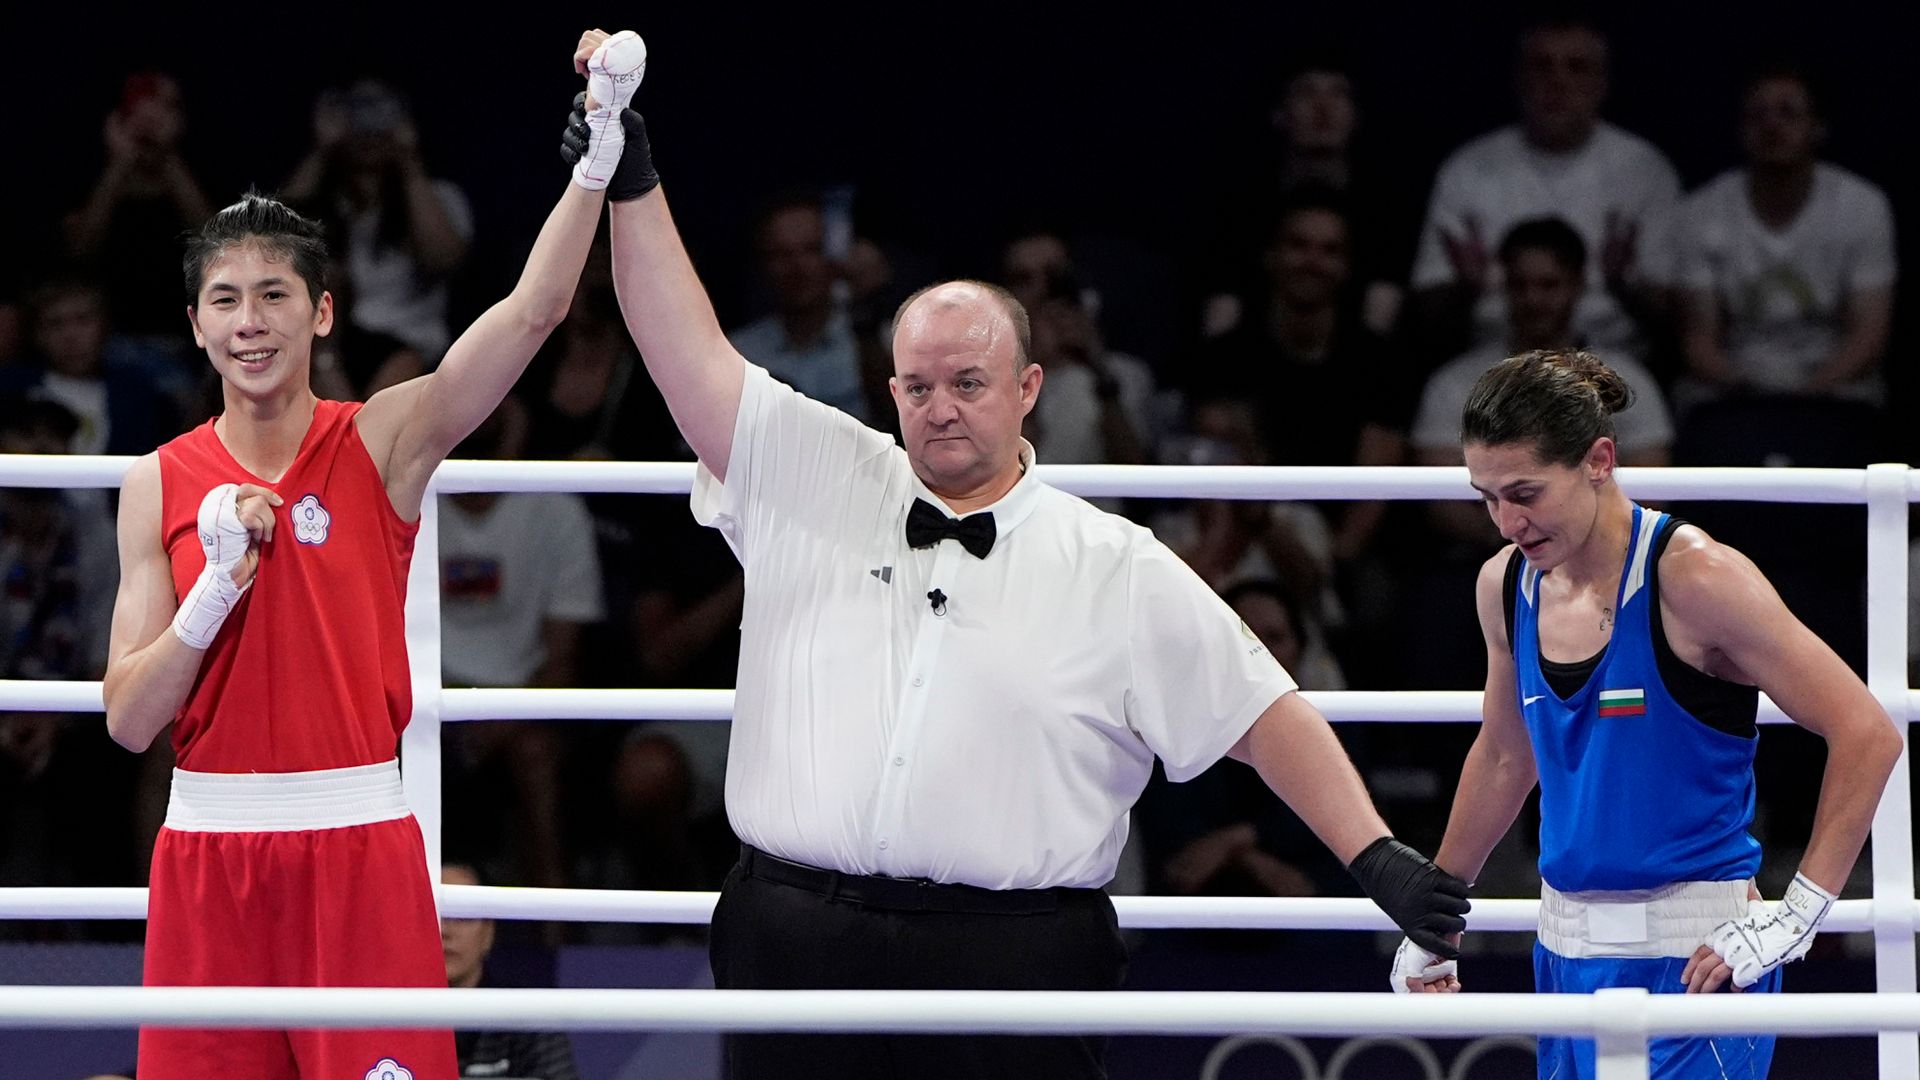 Second boxer caught up in gender row secures Olympic medal